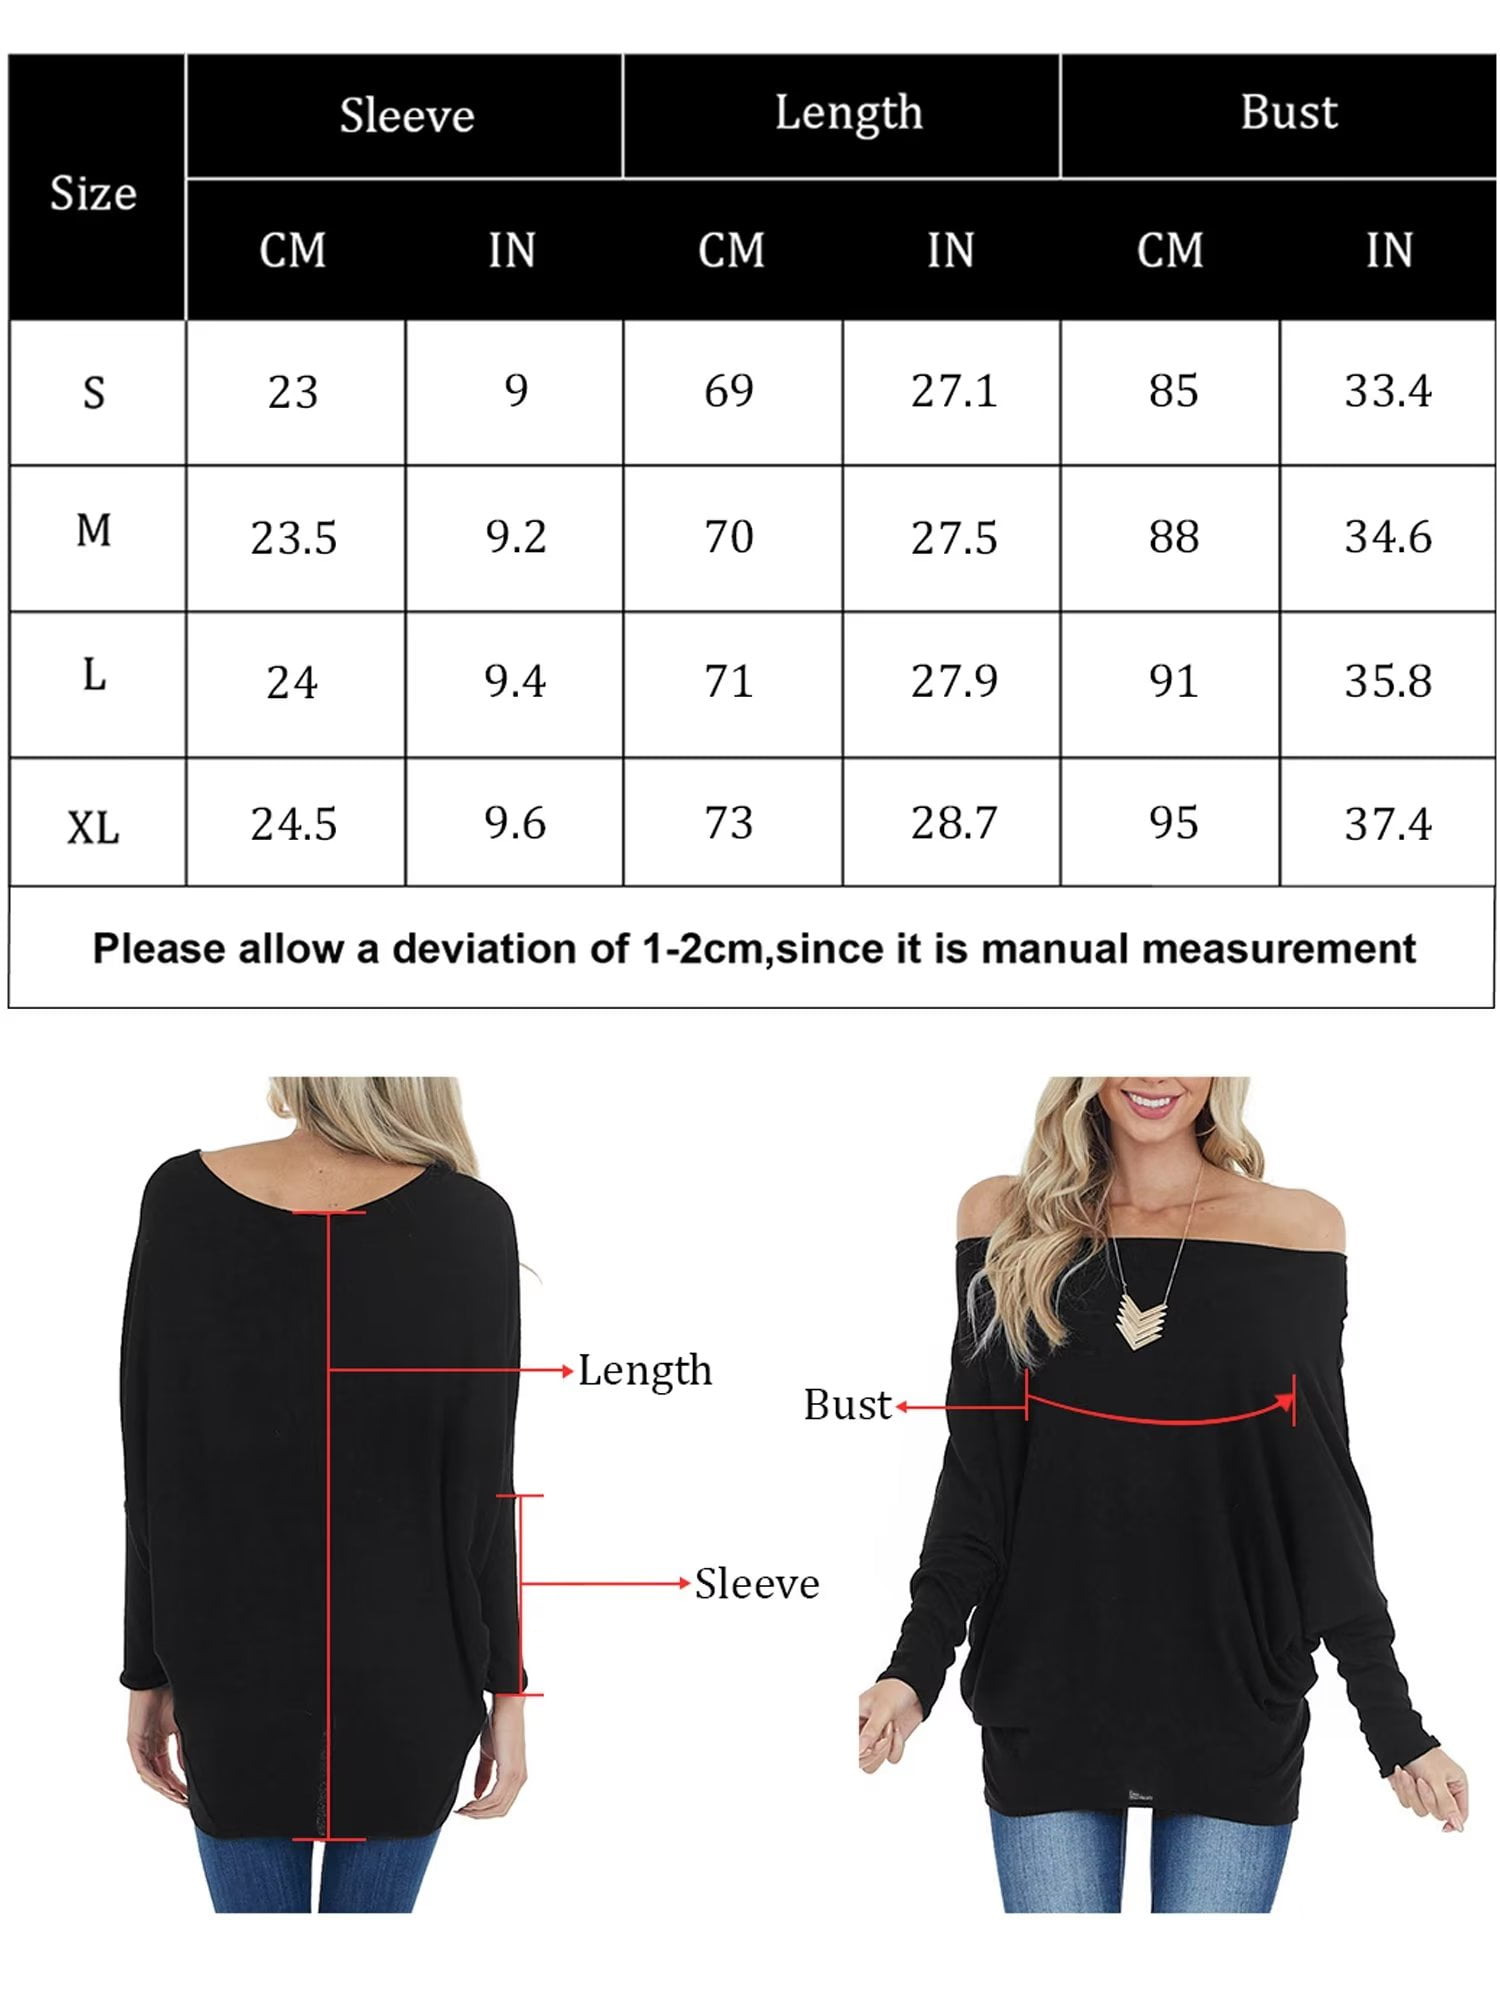 Women's Summer T Shirt Maxi Dress Batwing Sleeve,Deals Under 30 Dollars,5  Cent Items,Ladies Blouses on Clearance,5 and Under Items,Clearance  pallets,Womens Tops Dressy Casual Clearance